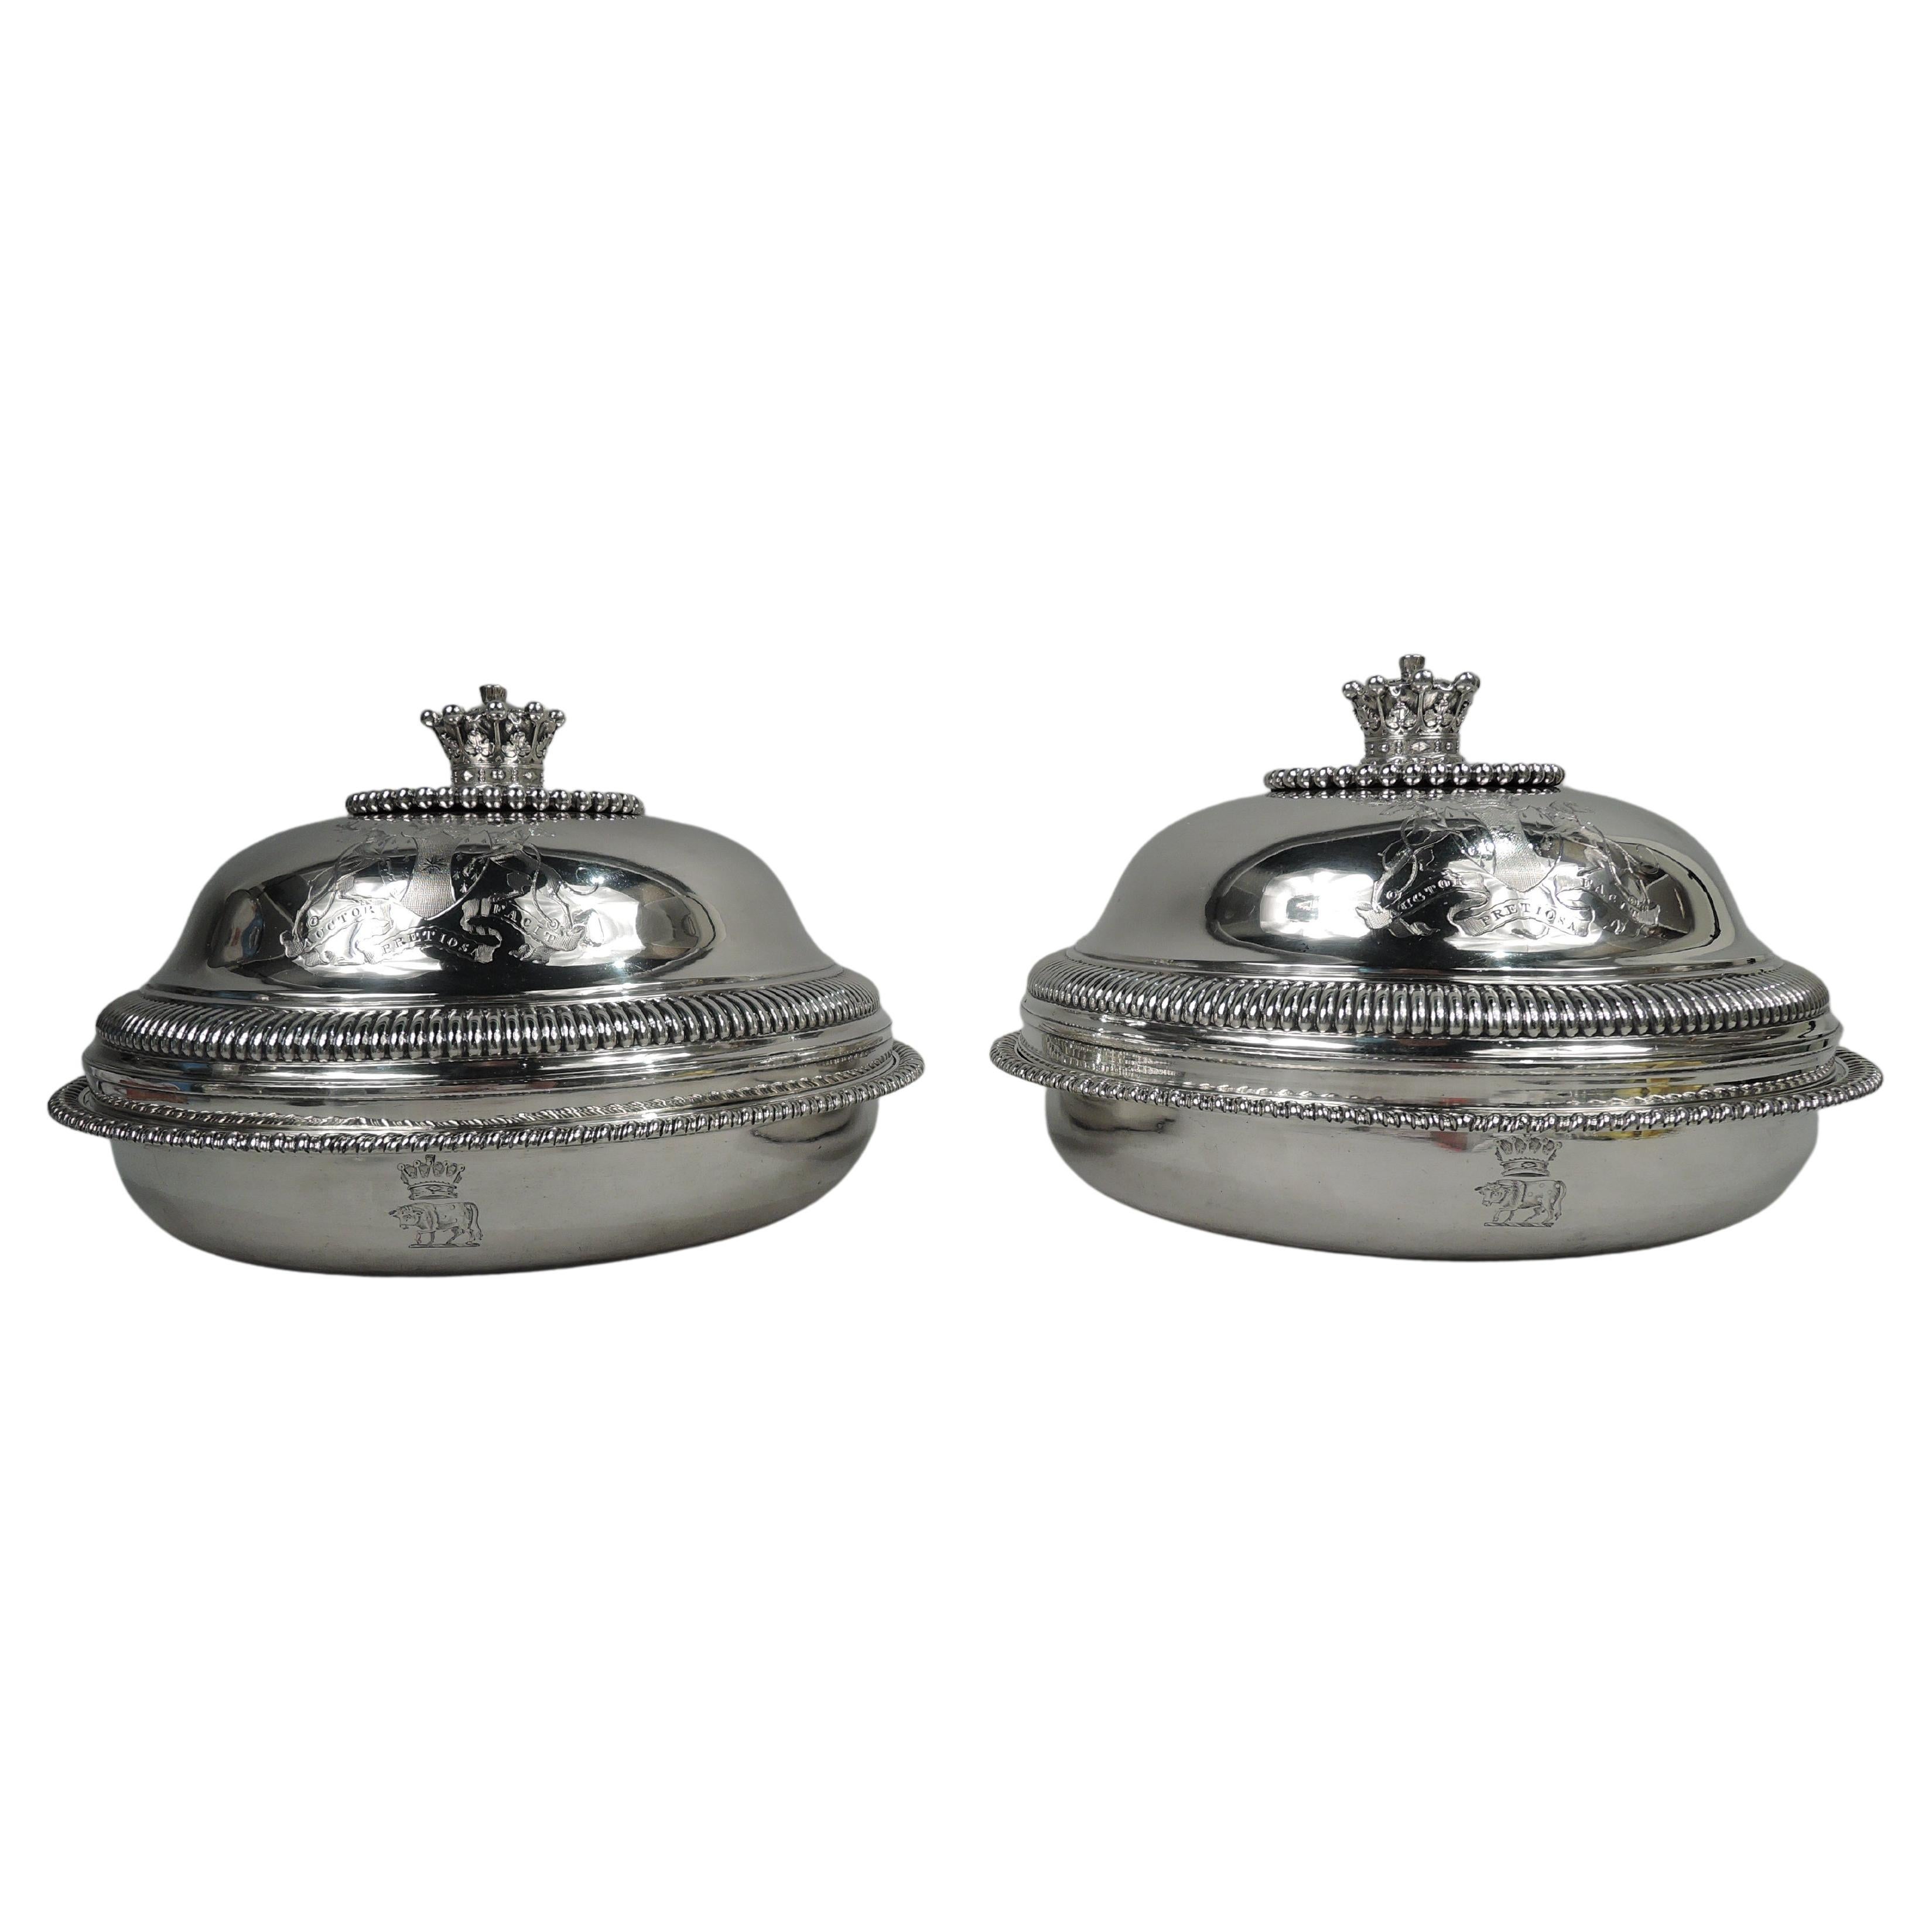 Pair of Paul Storr English Georgian Neoclassical Vegetable Dishes, 1805 For Sale